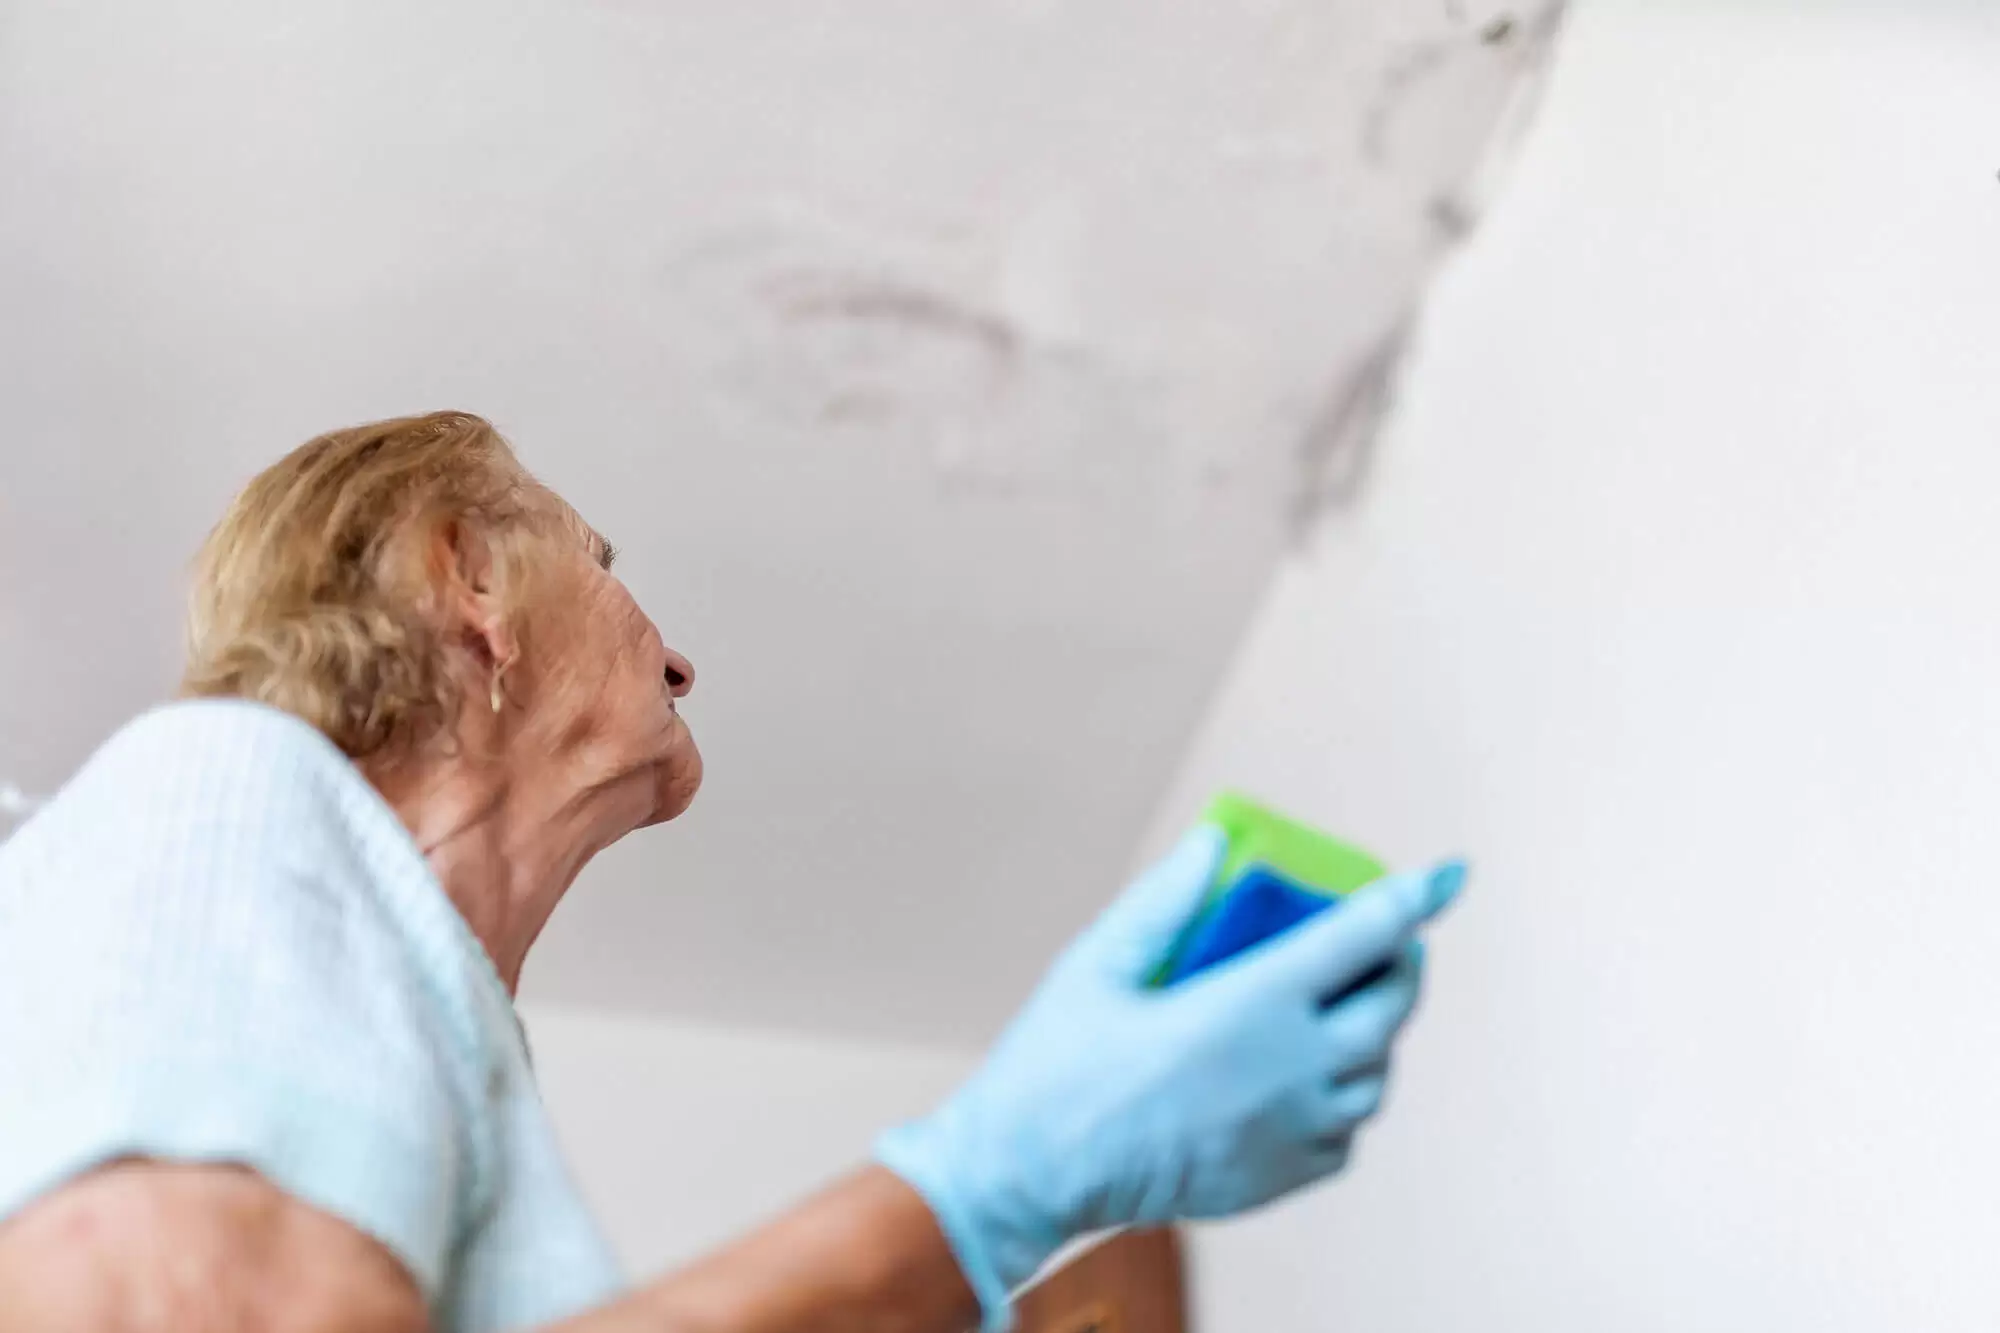 What's the difference between mold and mildew on a wall?